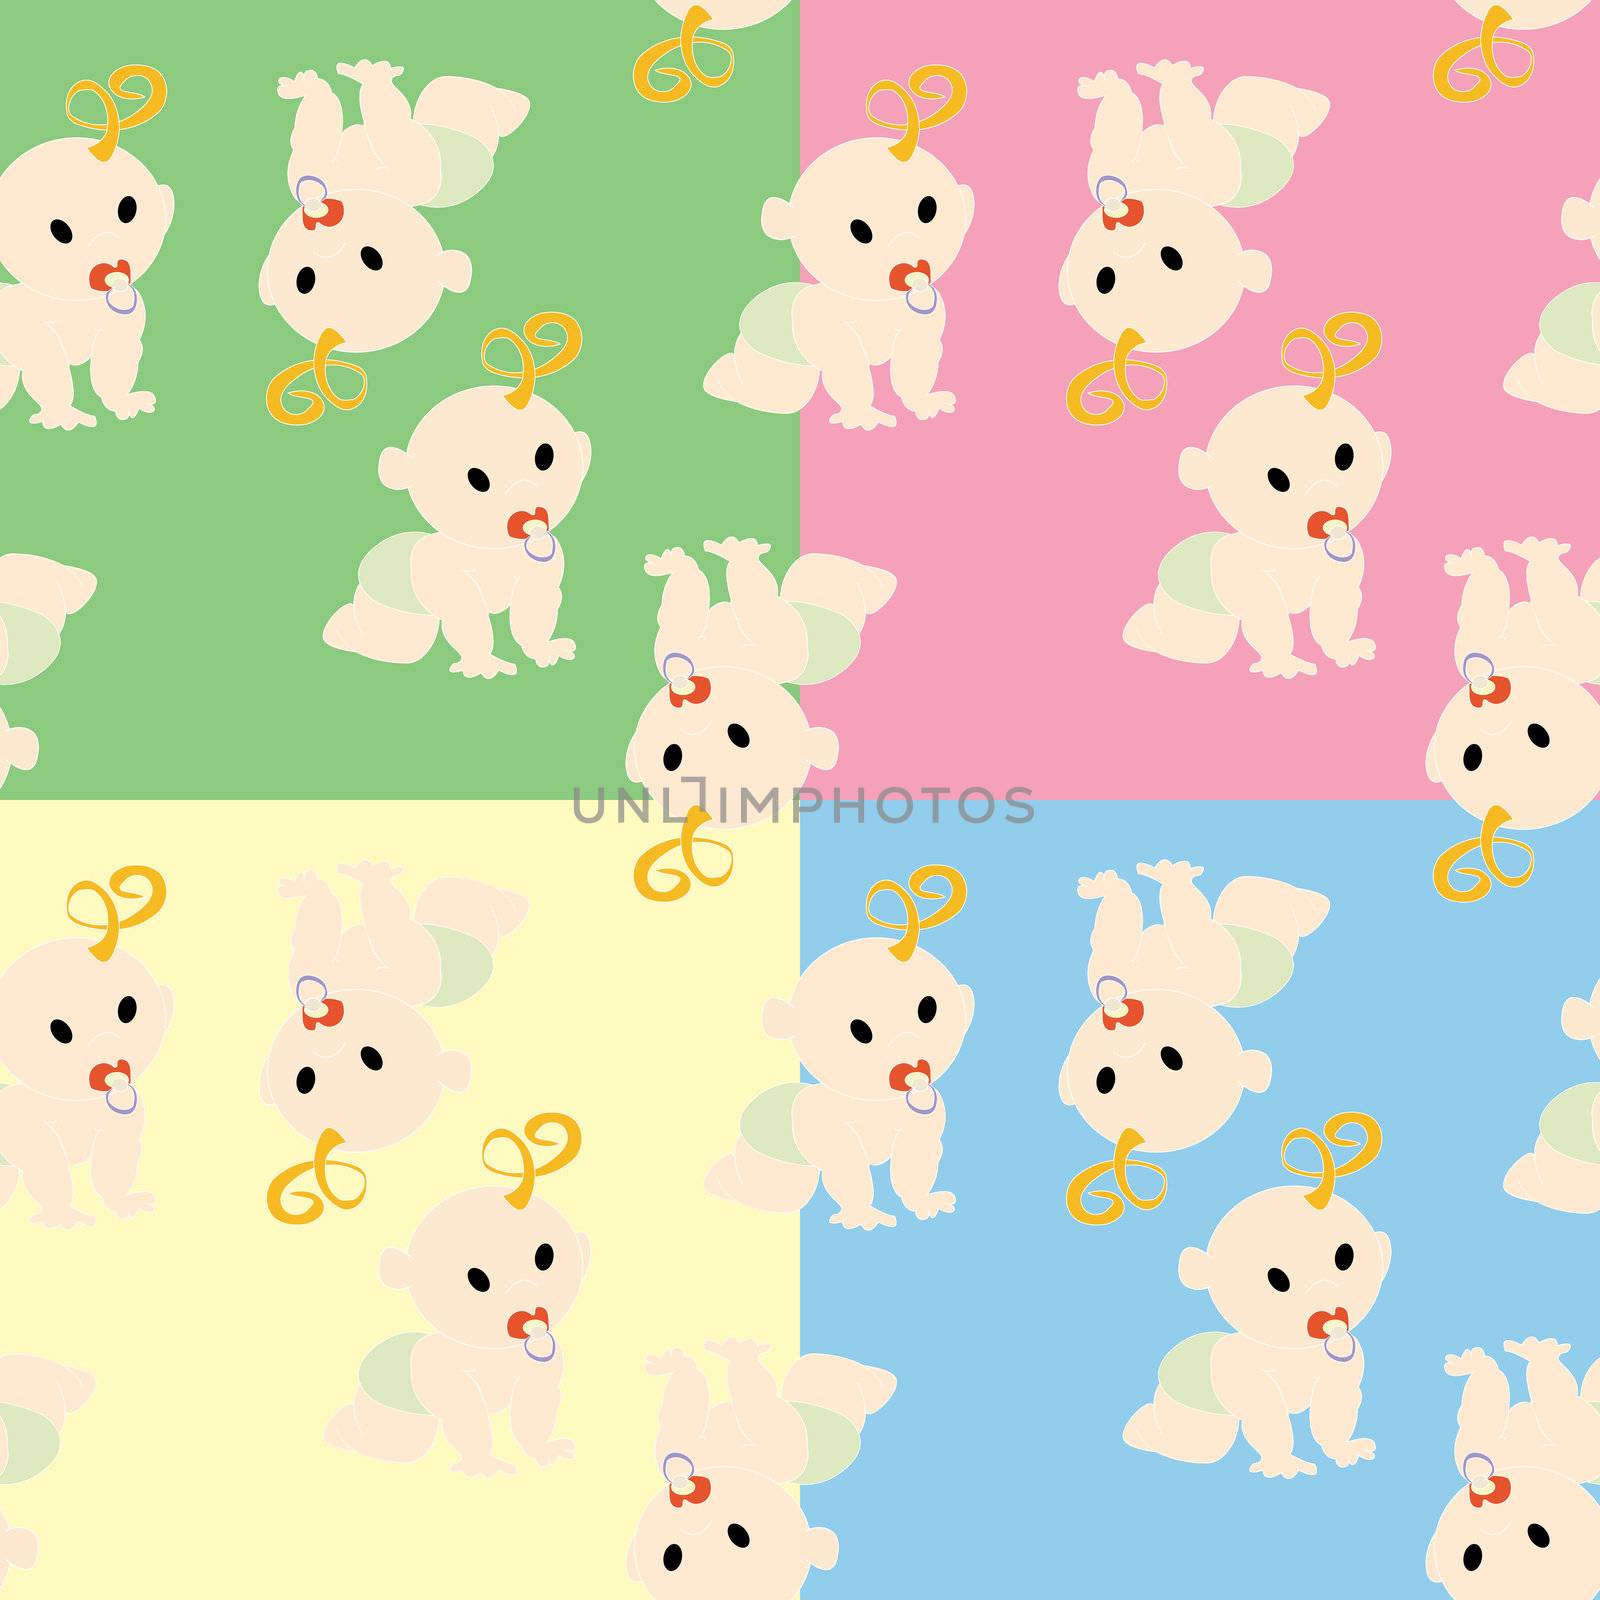 Pattern with babies in colors, vector